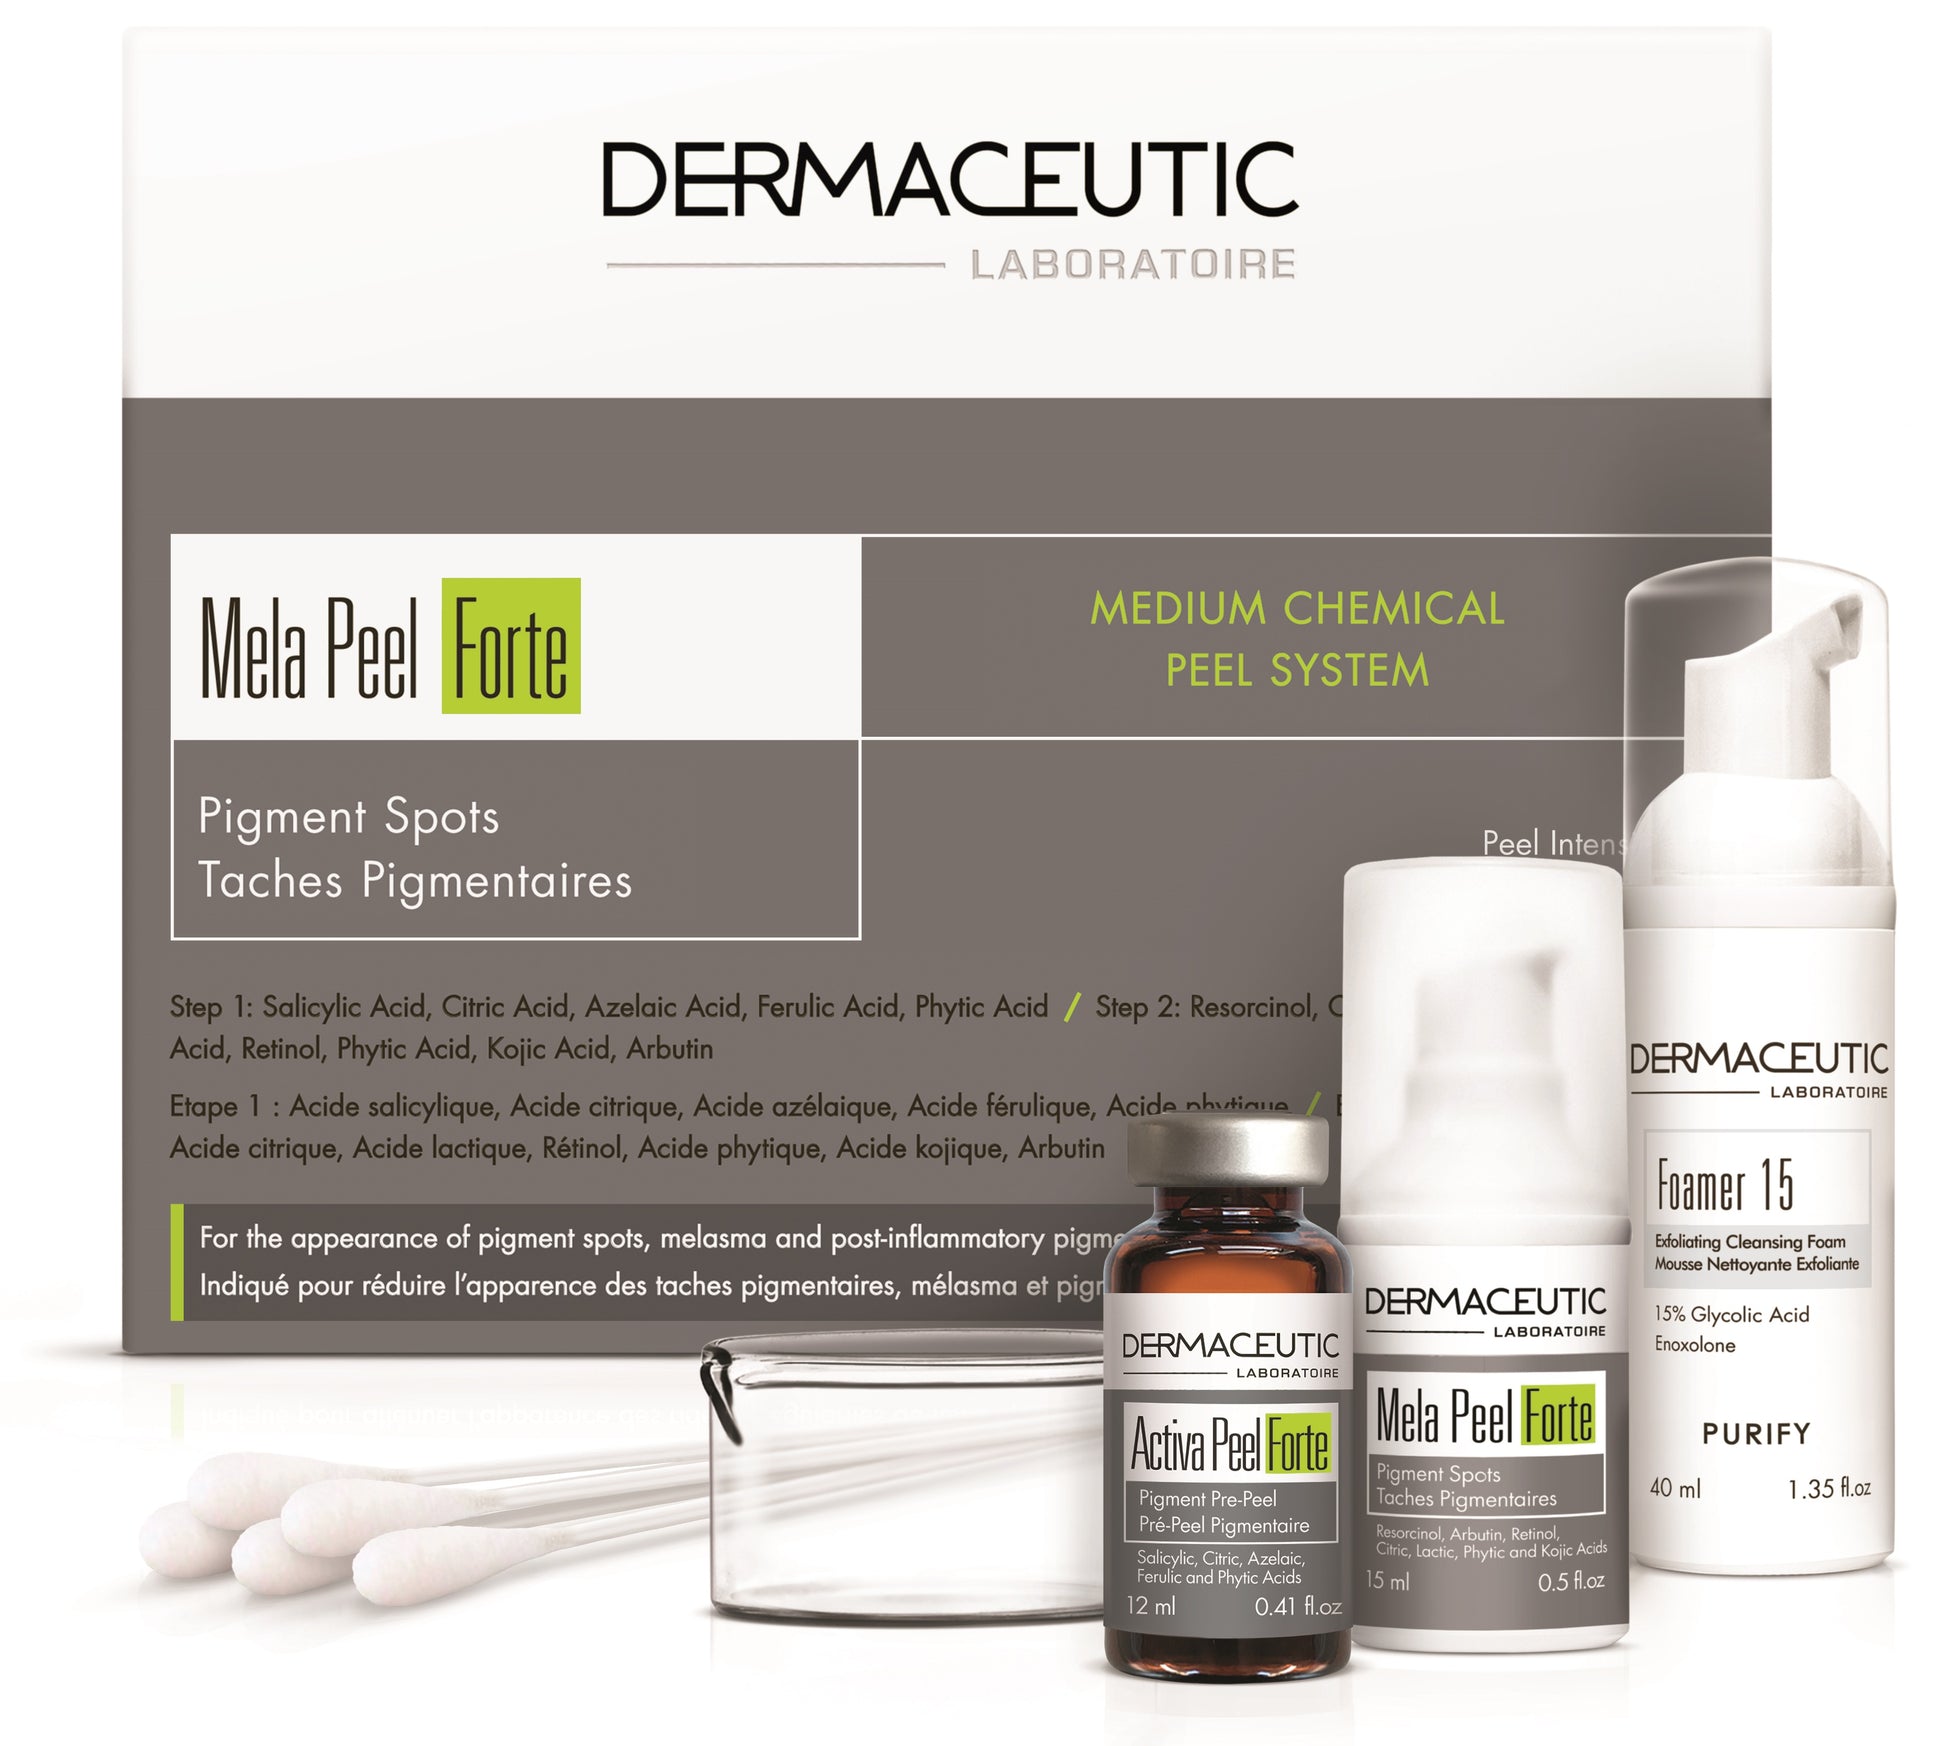 mela peel forte kit packaging and inclusions